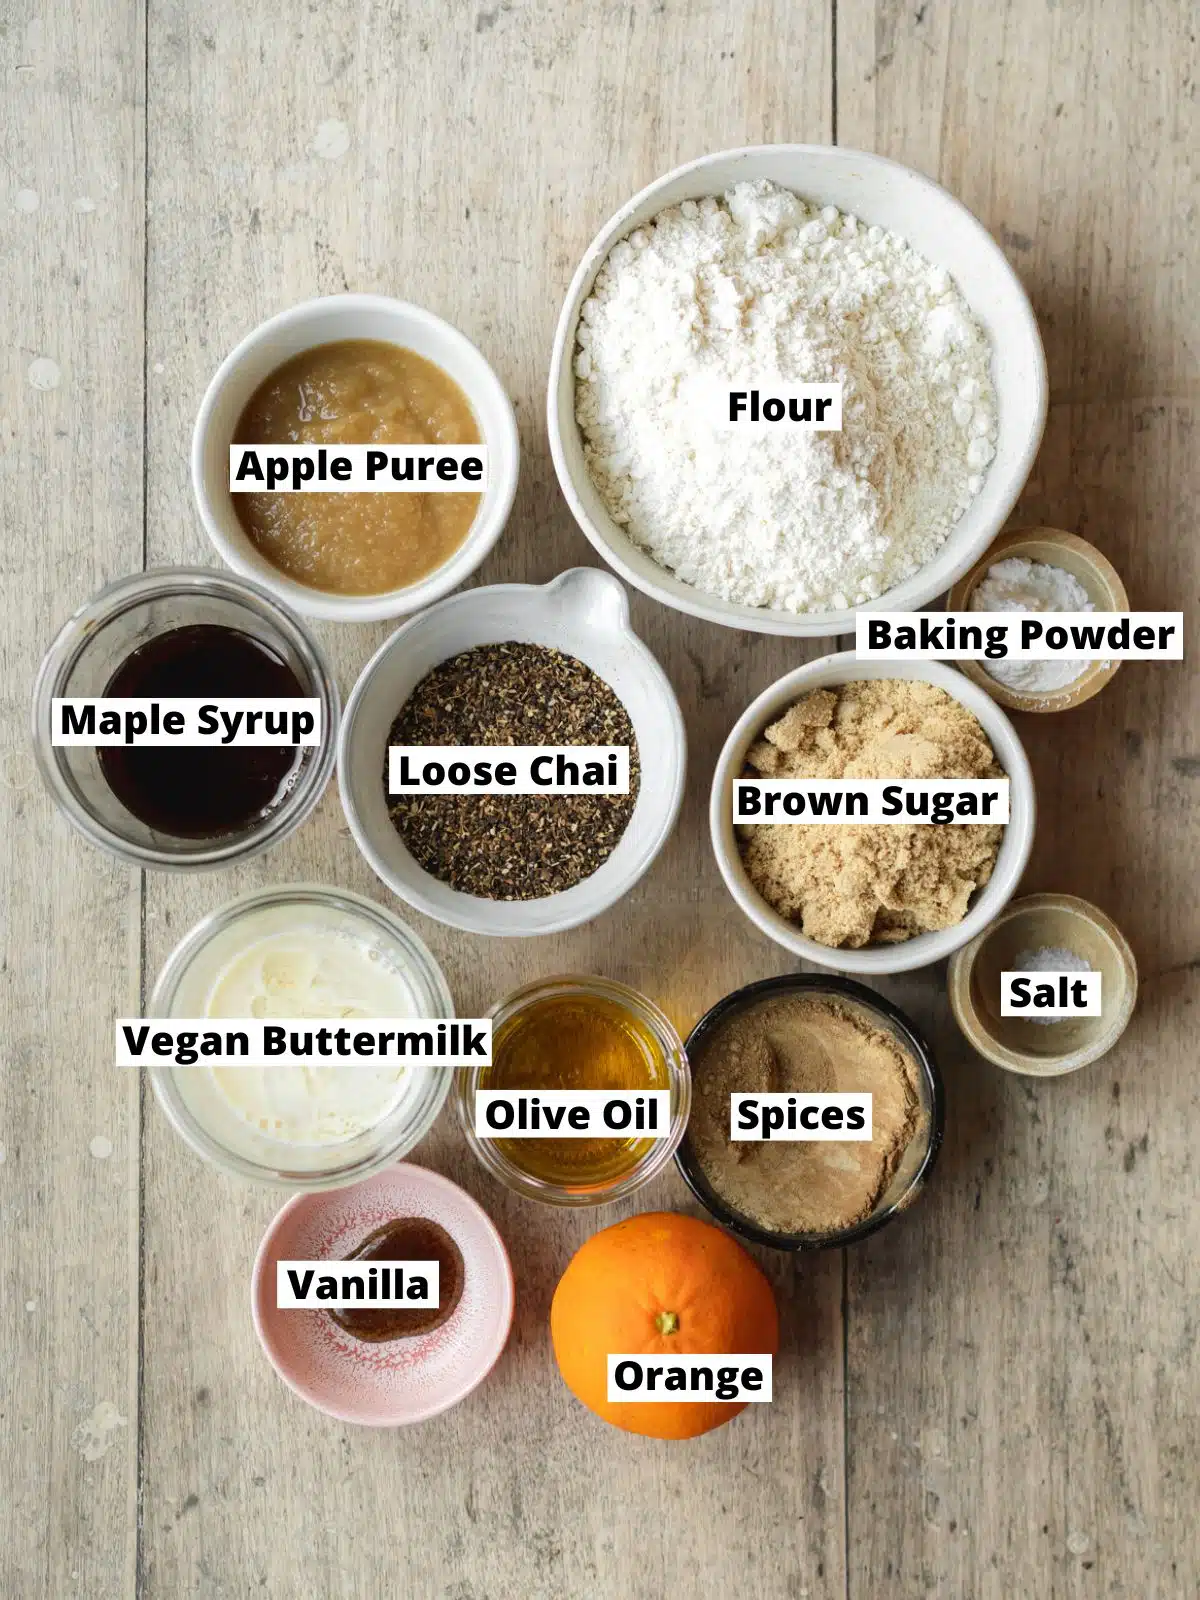 ingredients for chai bread measured out in bowls on a wooden surface.